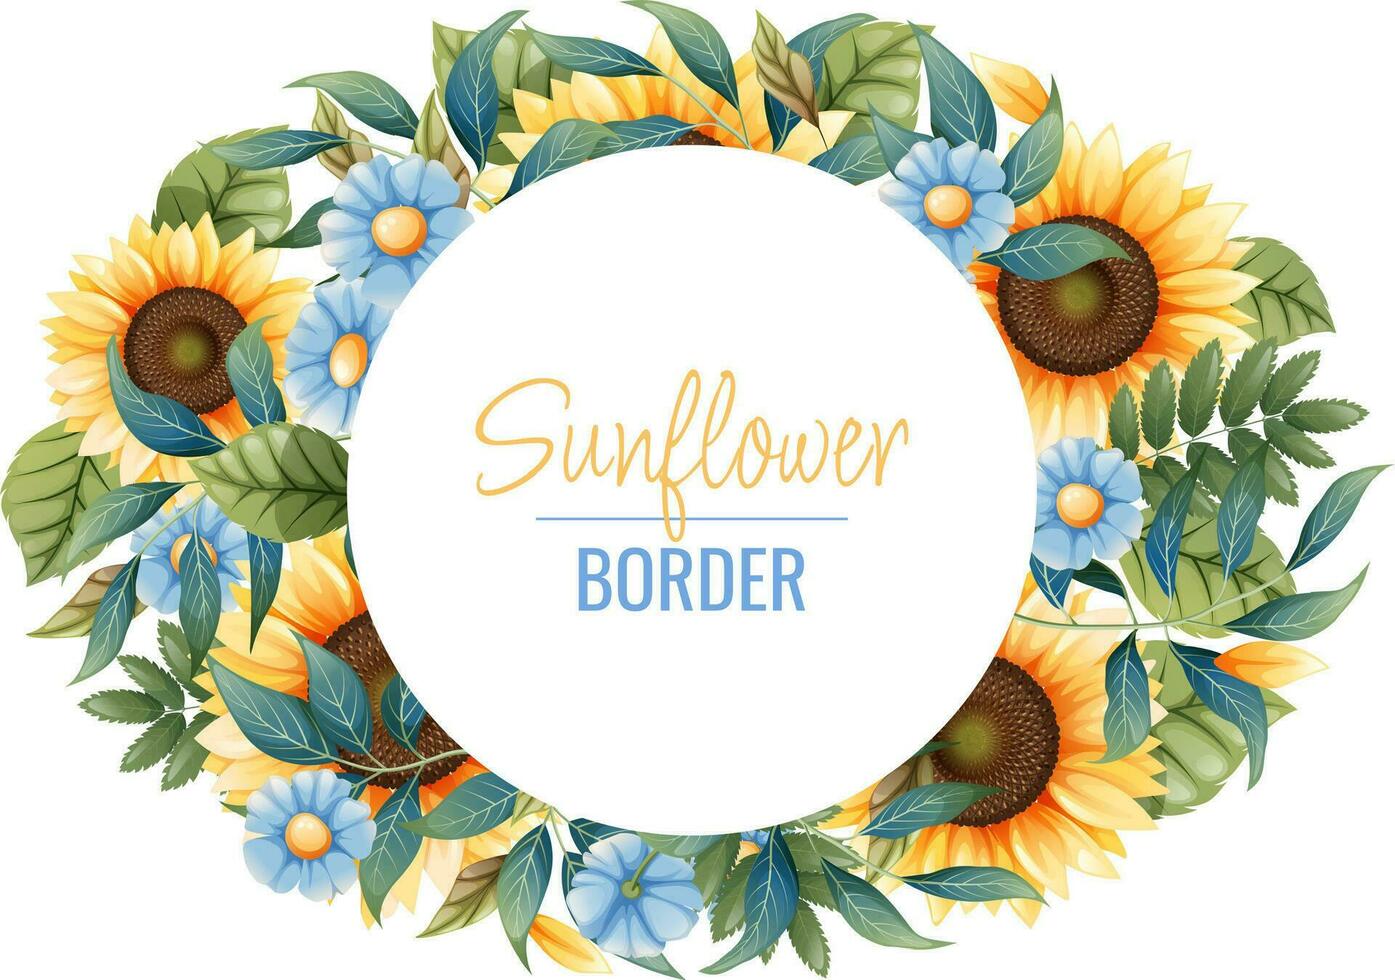 Banner template with sunflowers, blue daisies. Frame, banner with autumn wildflowers. Background with botanical elements. vector